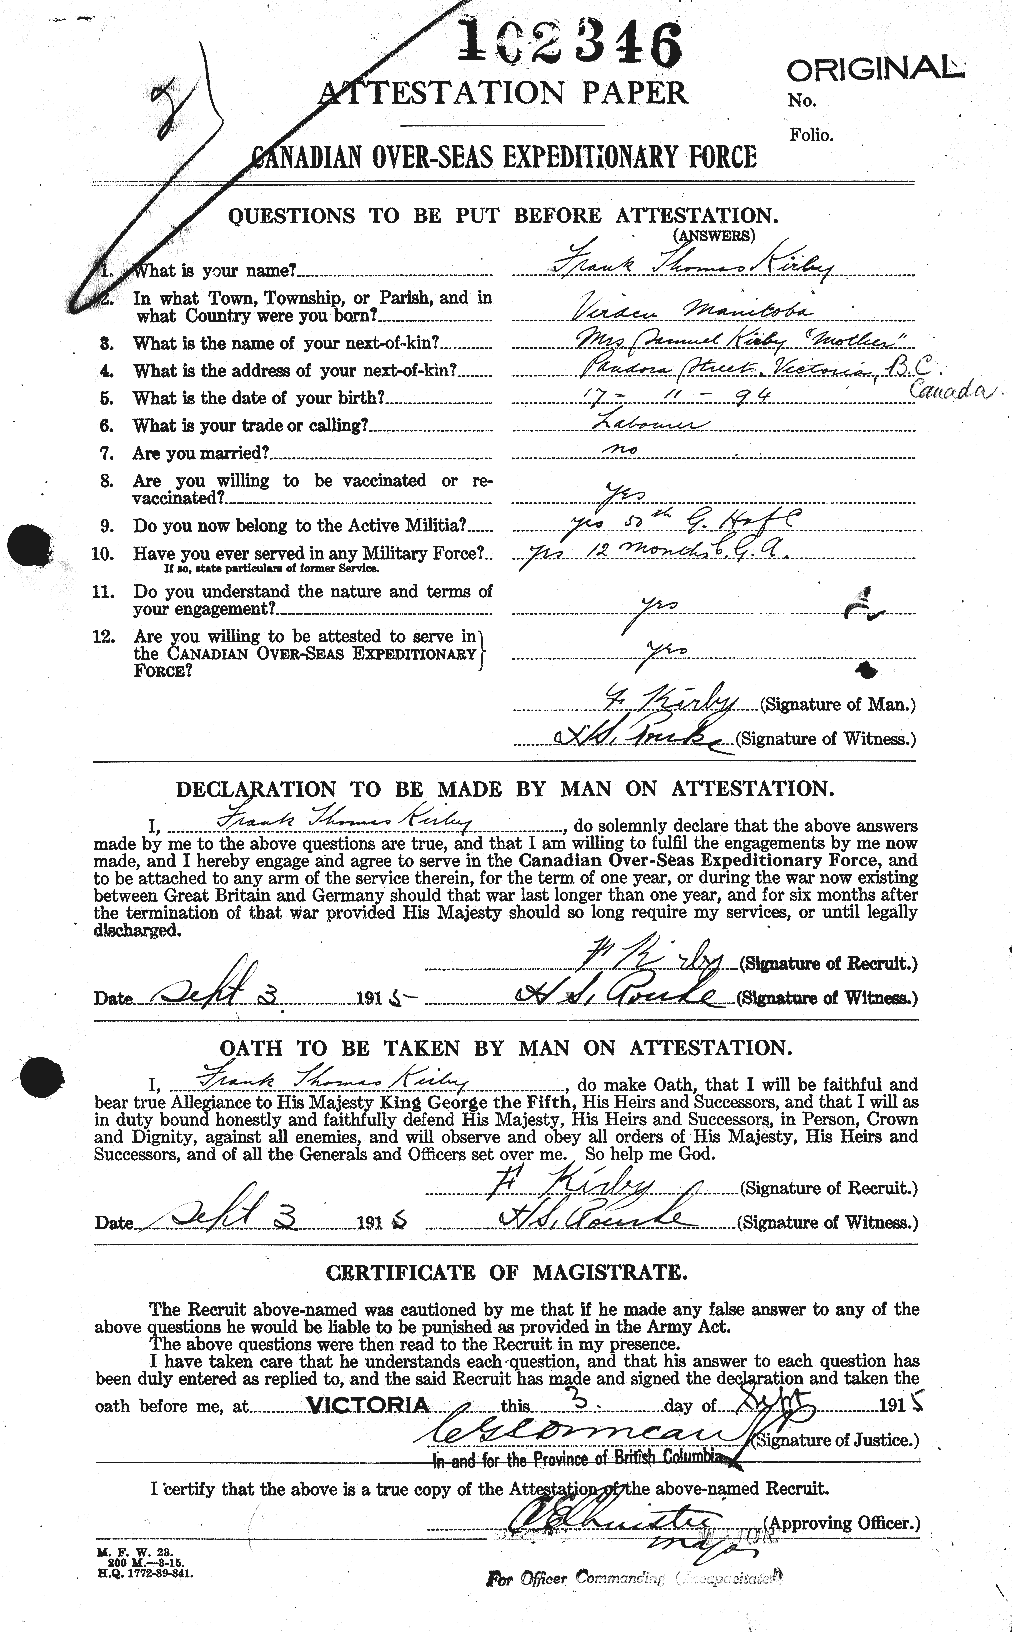 Personnel Records of the First World War - CEF 437186a